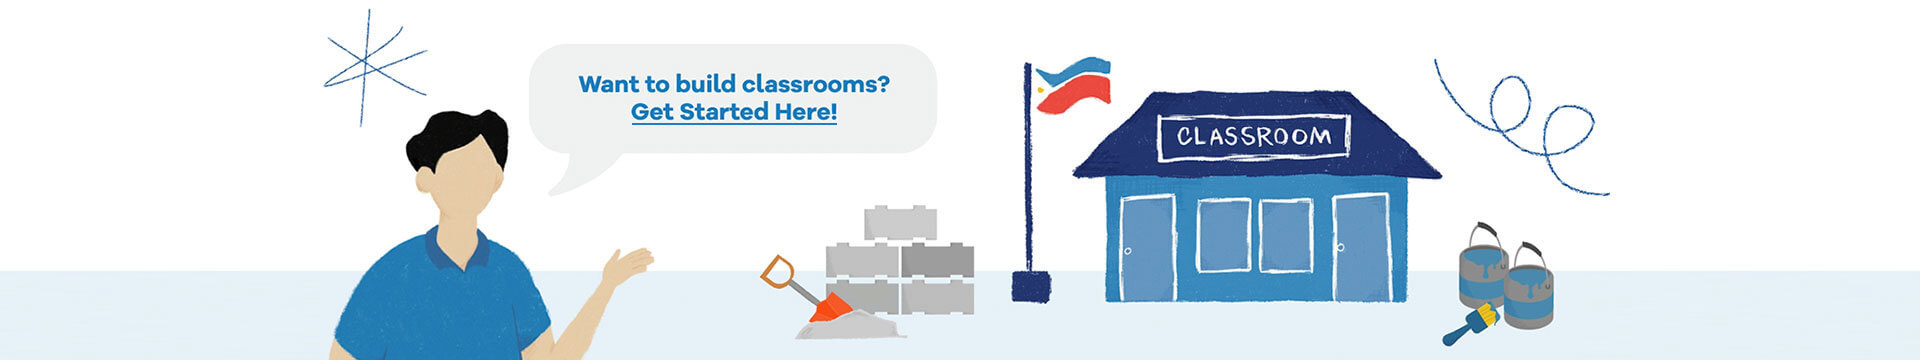 Want to build classrooms? Click here!